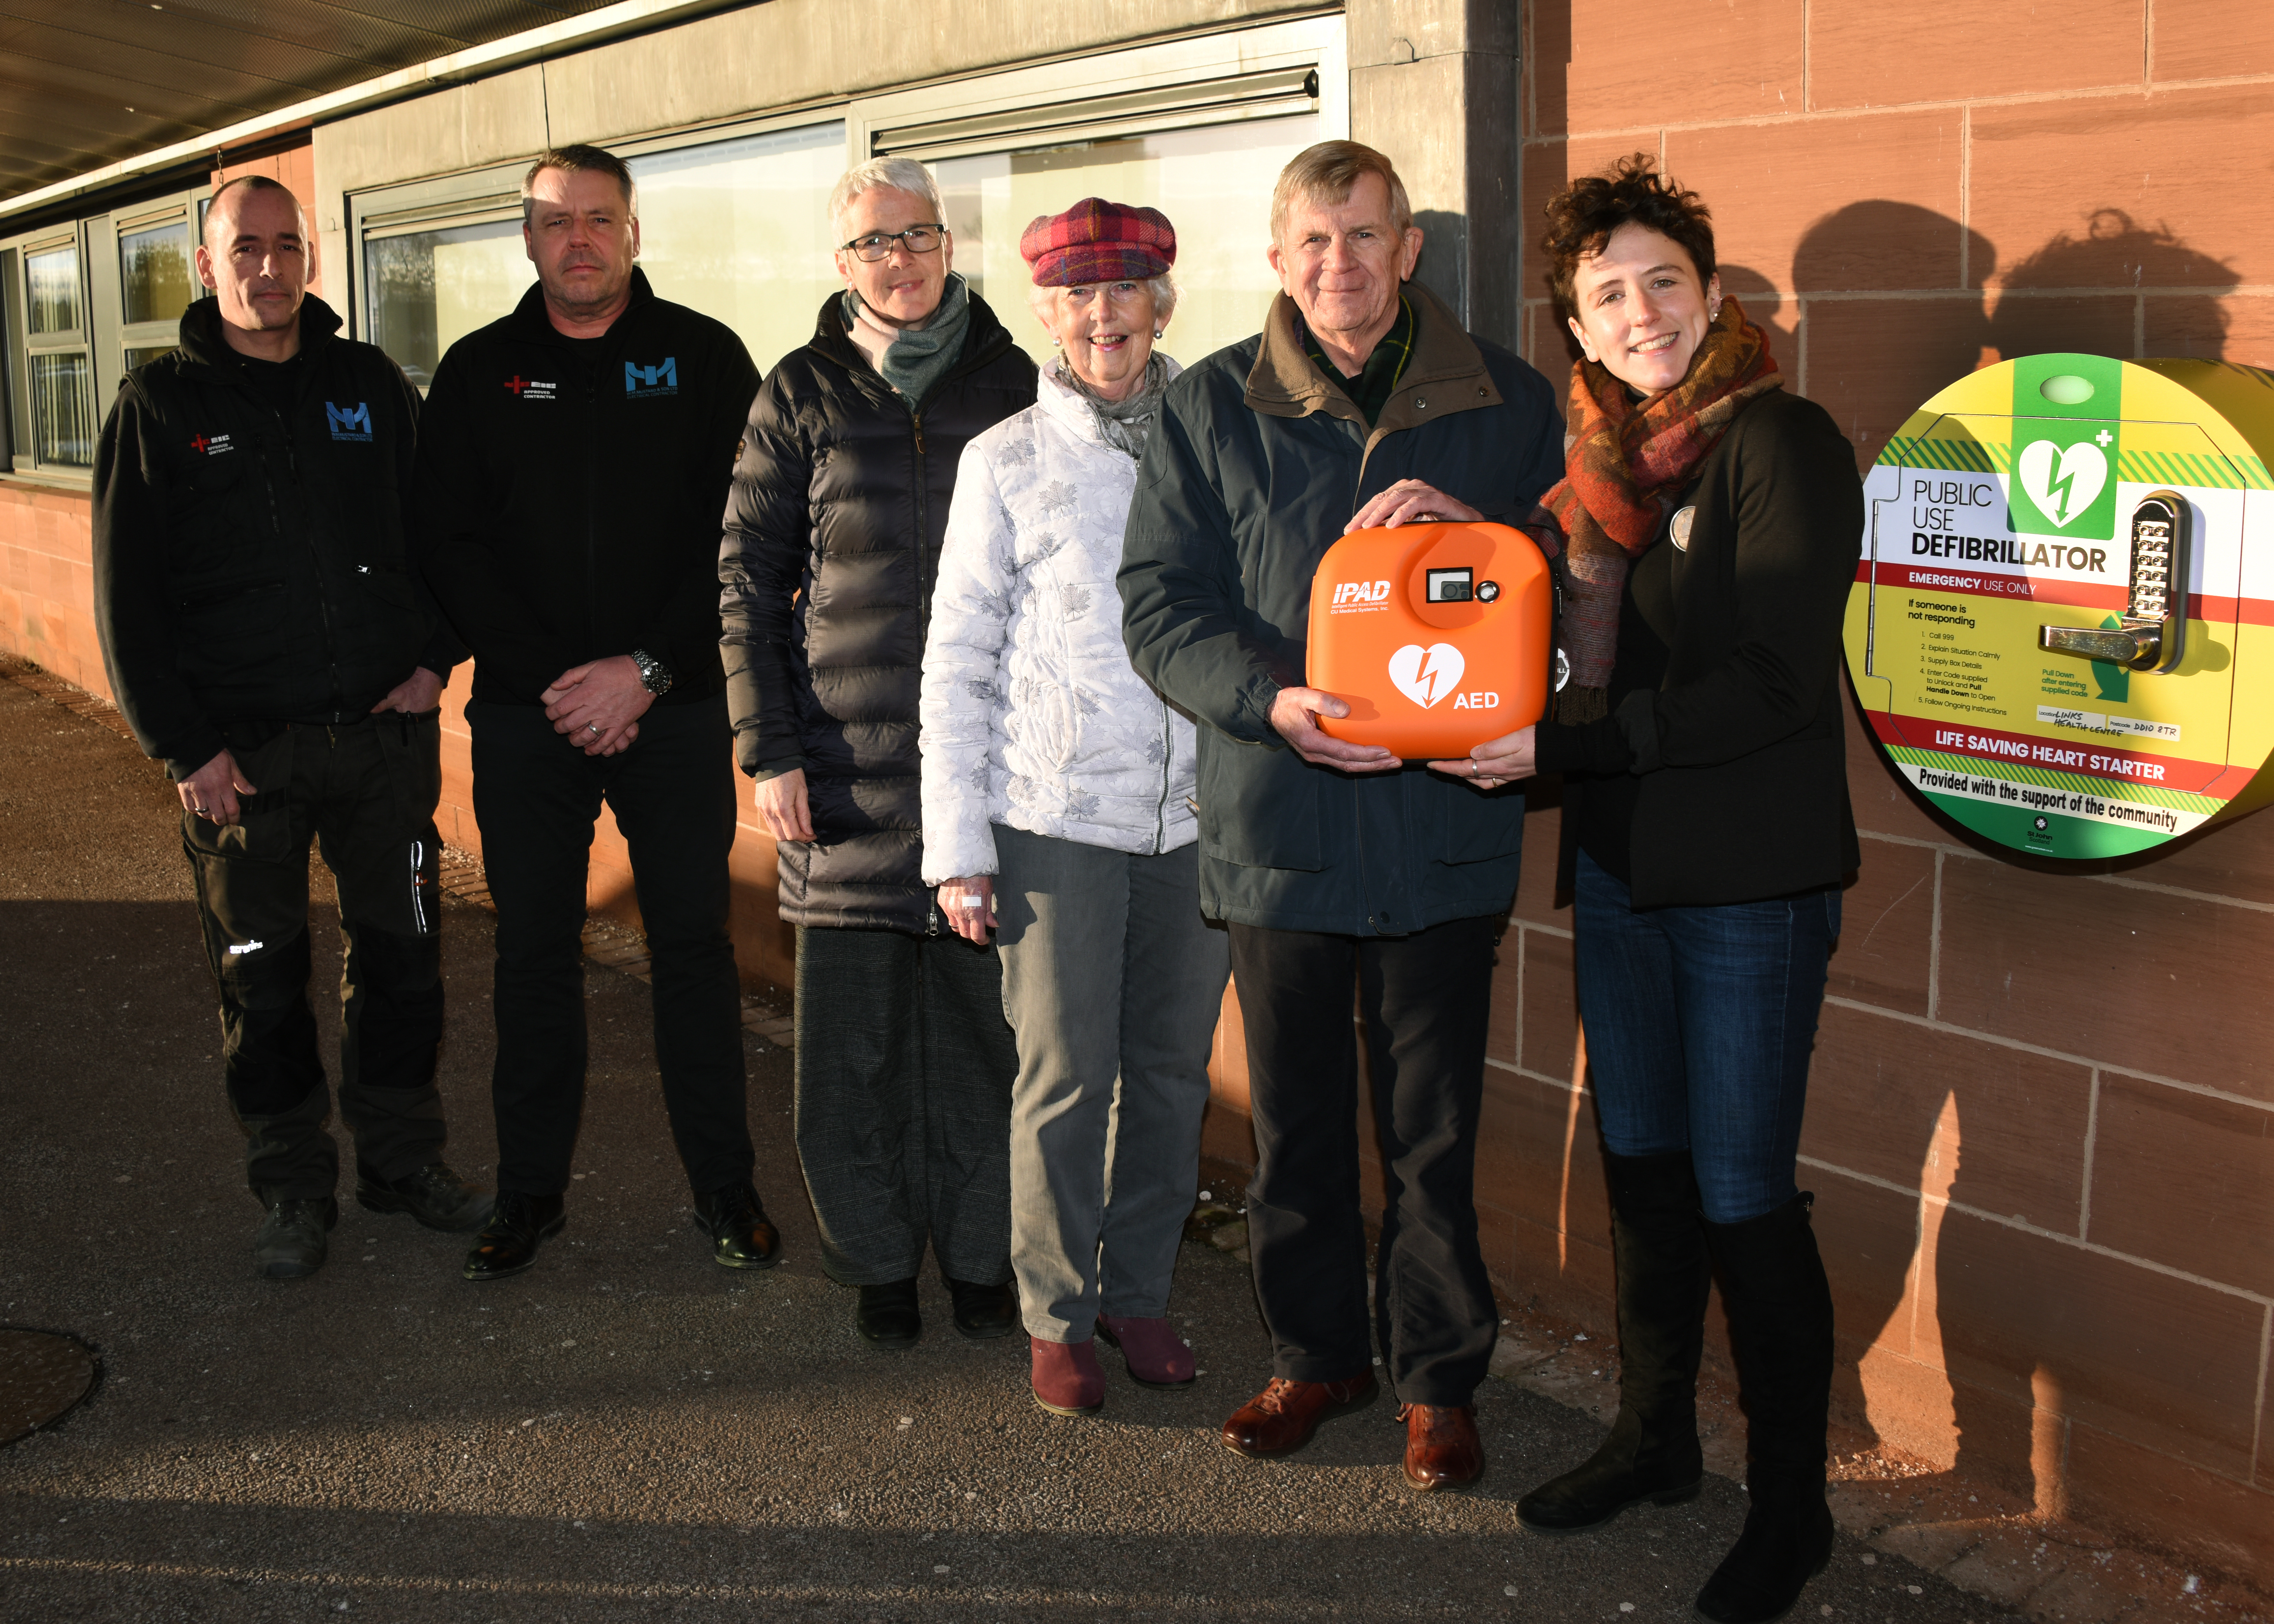 From right: Mairi Gougeon, David Milne (Rotary), Susan Coull (Inner Wheel), Melanie Cargill (First Responder),  electricians Bill Mustard and Chris Taylor